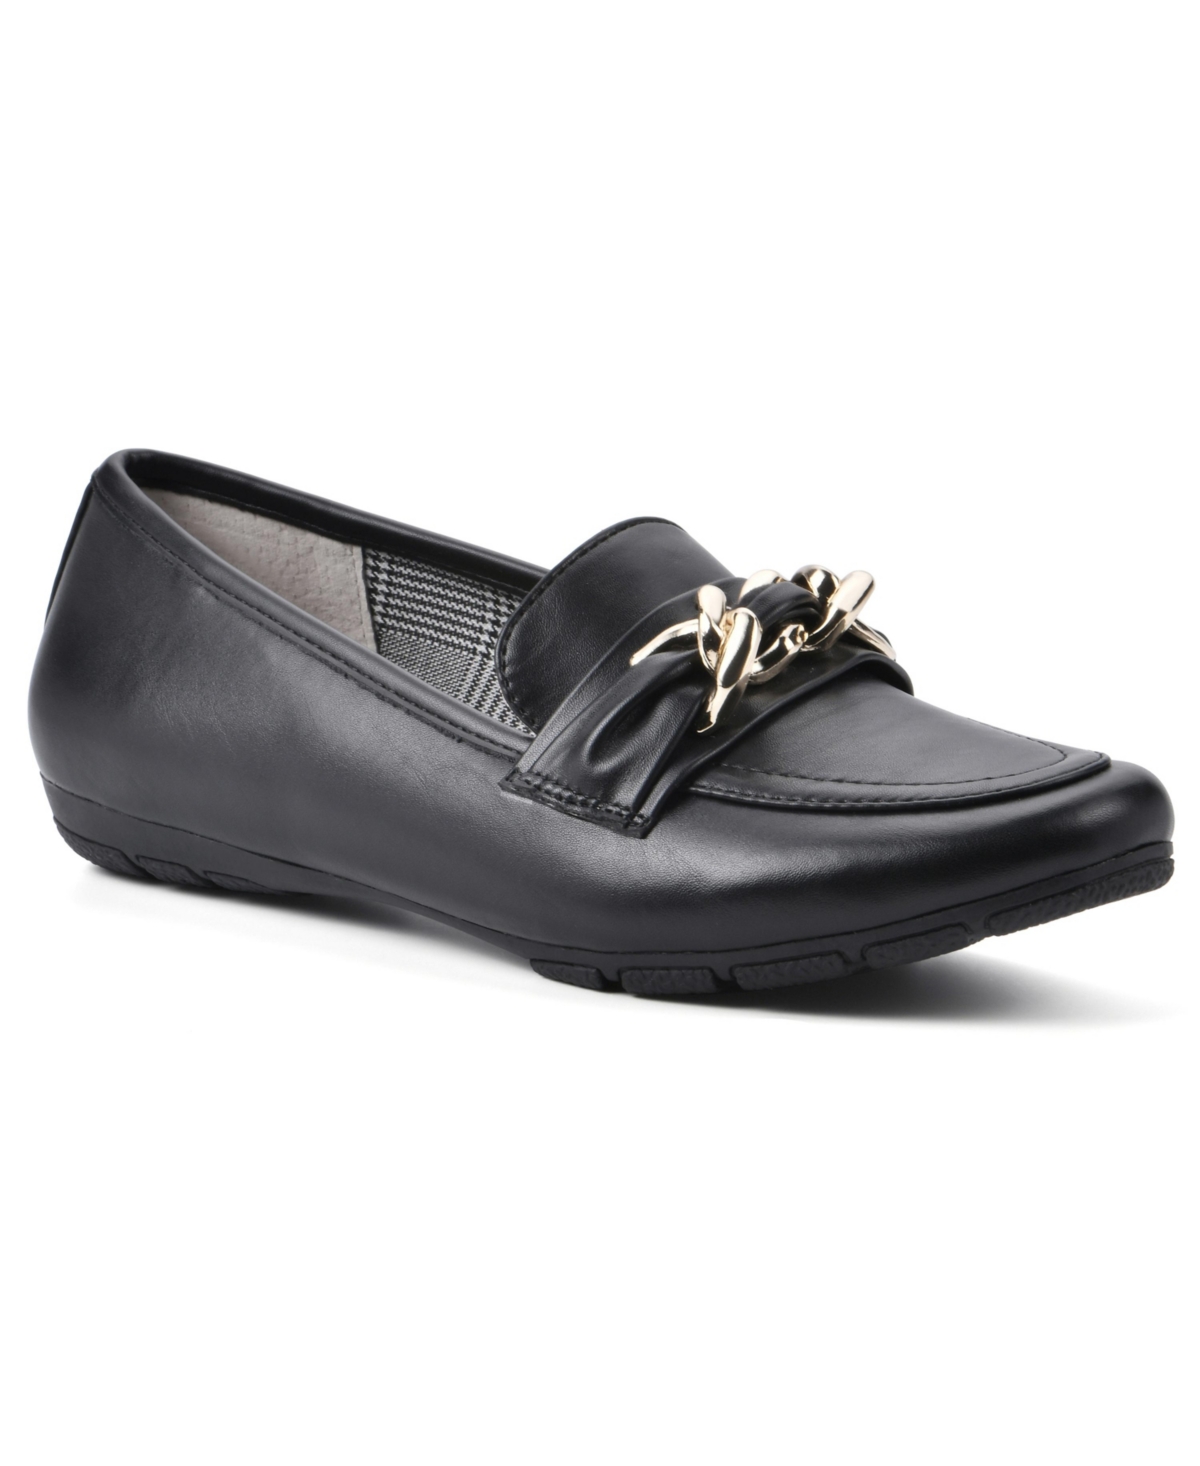 Women's Gainful Loafers - Black Smooth